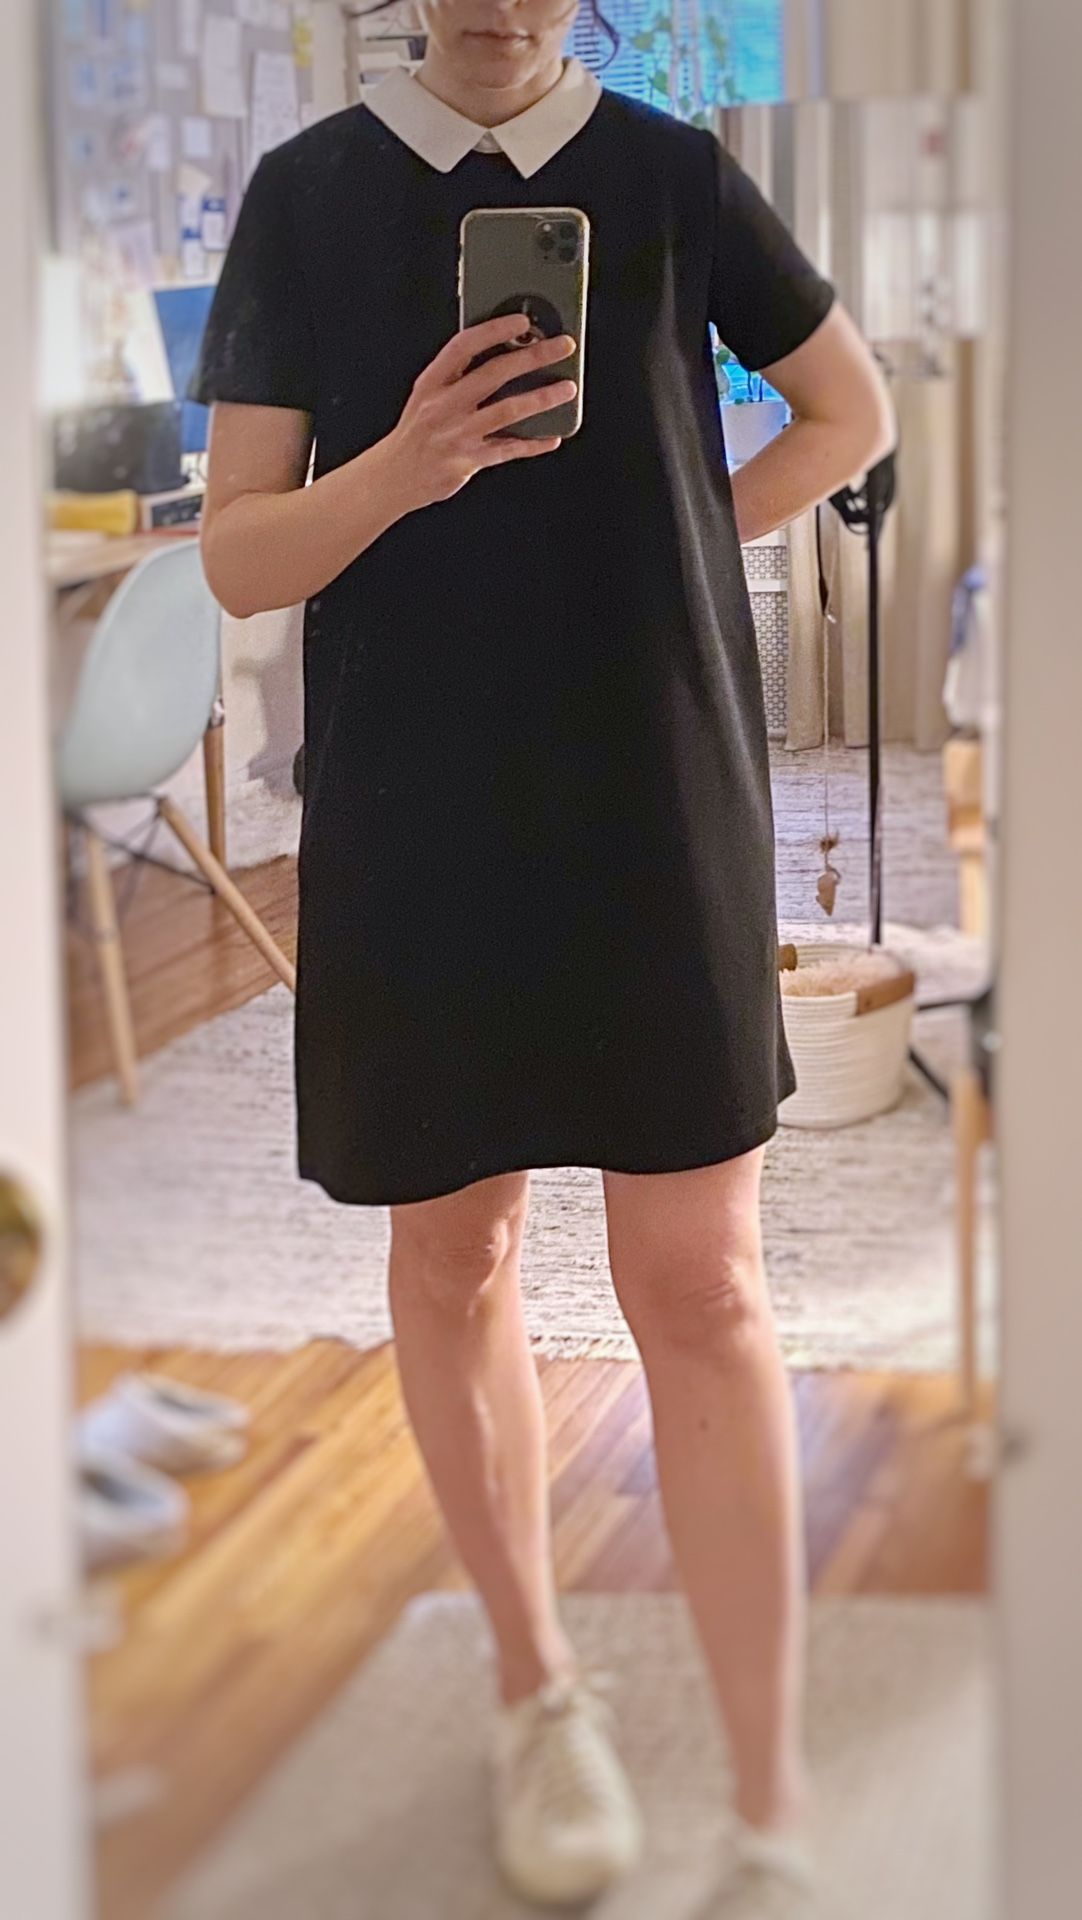 Casual-Classy Black Dress With White Collar